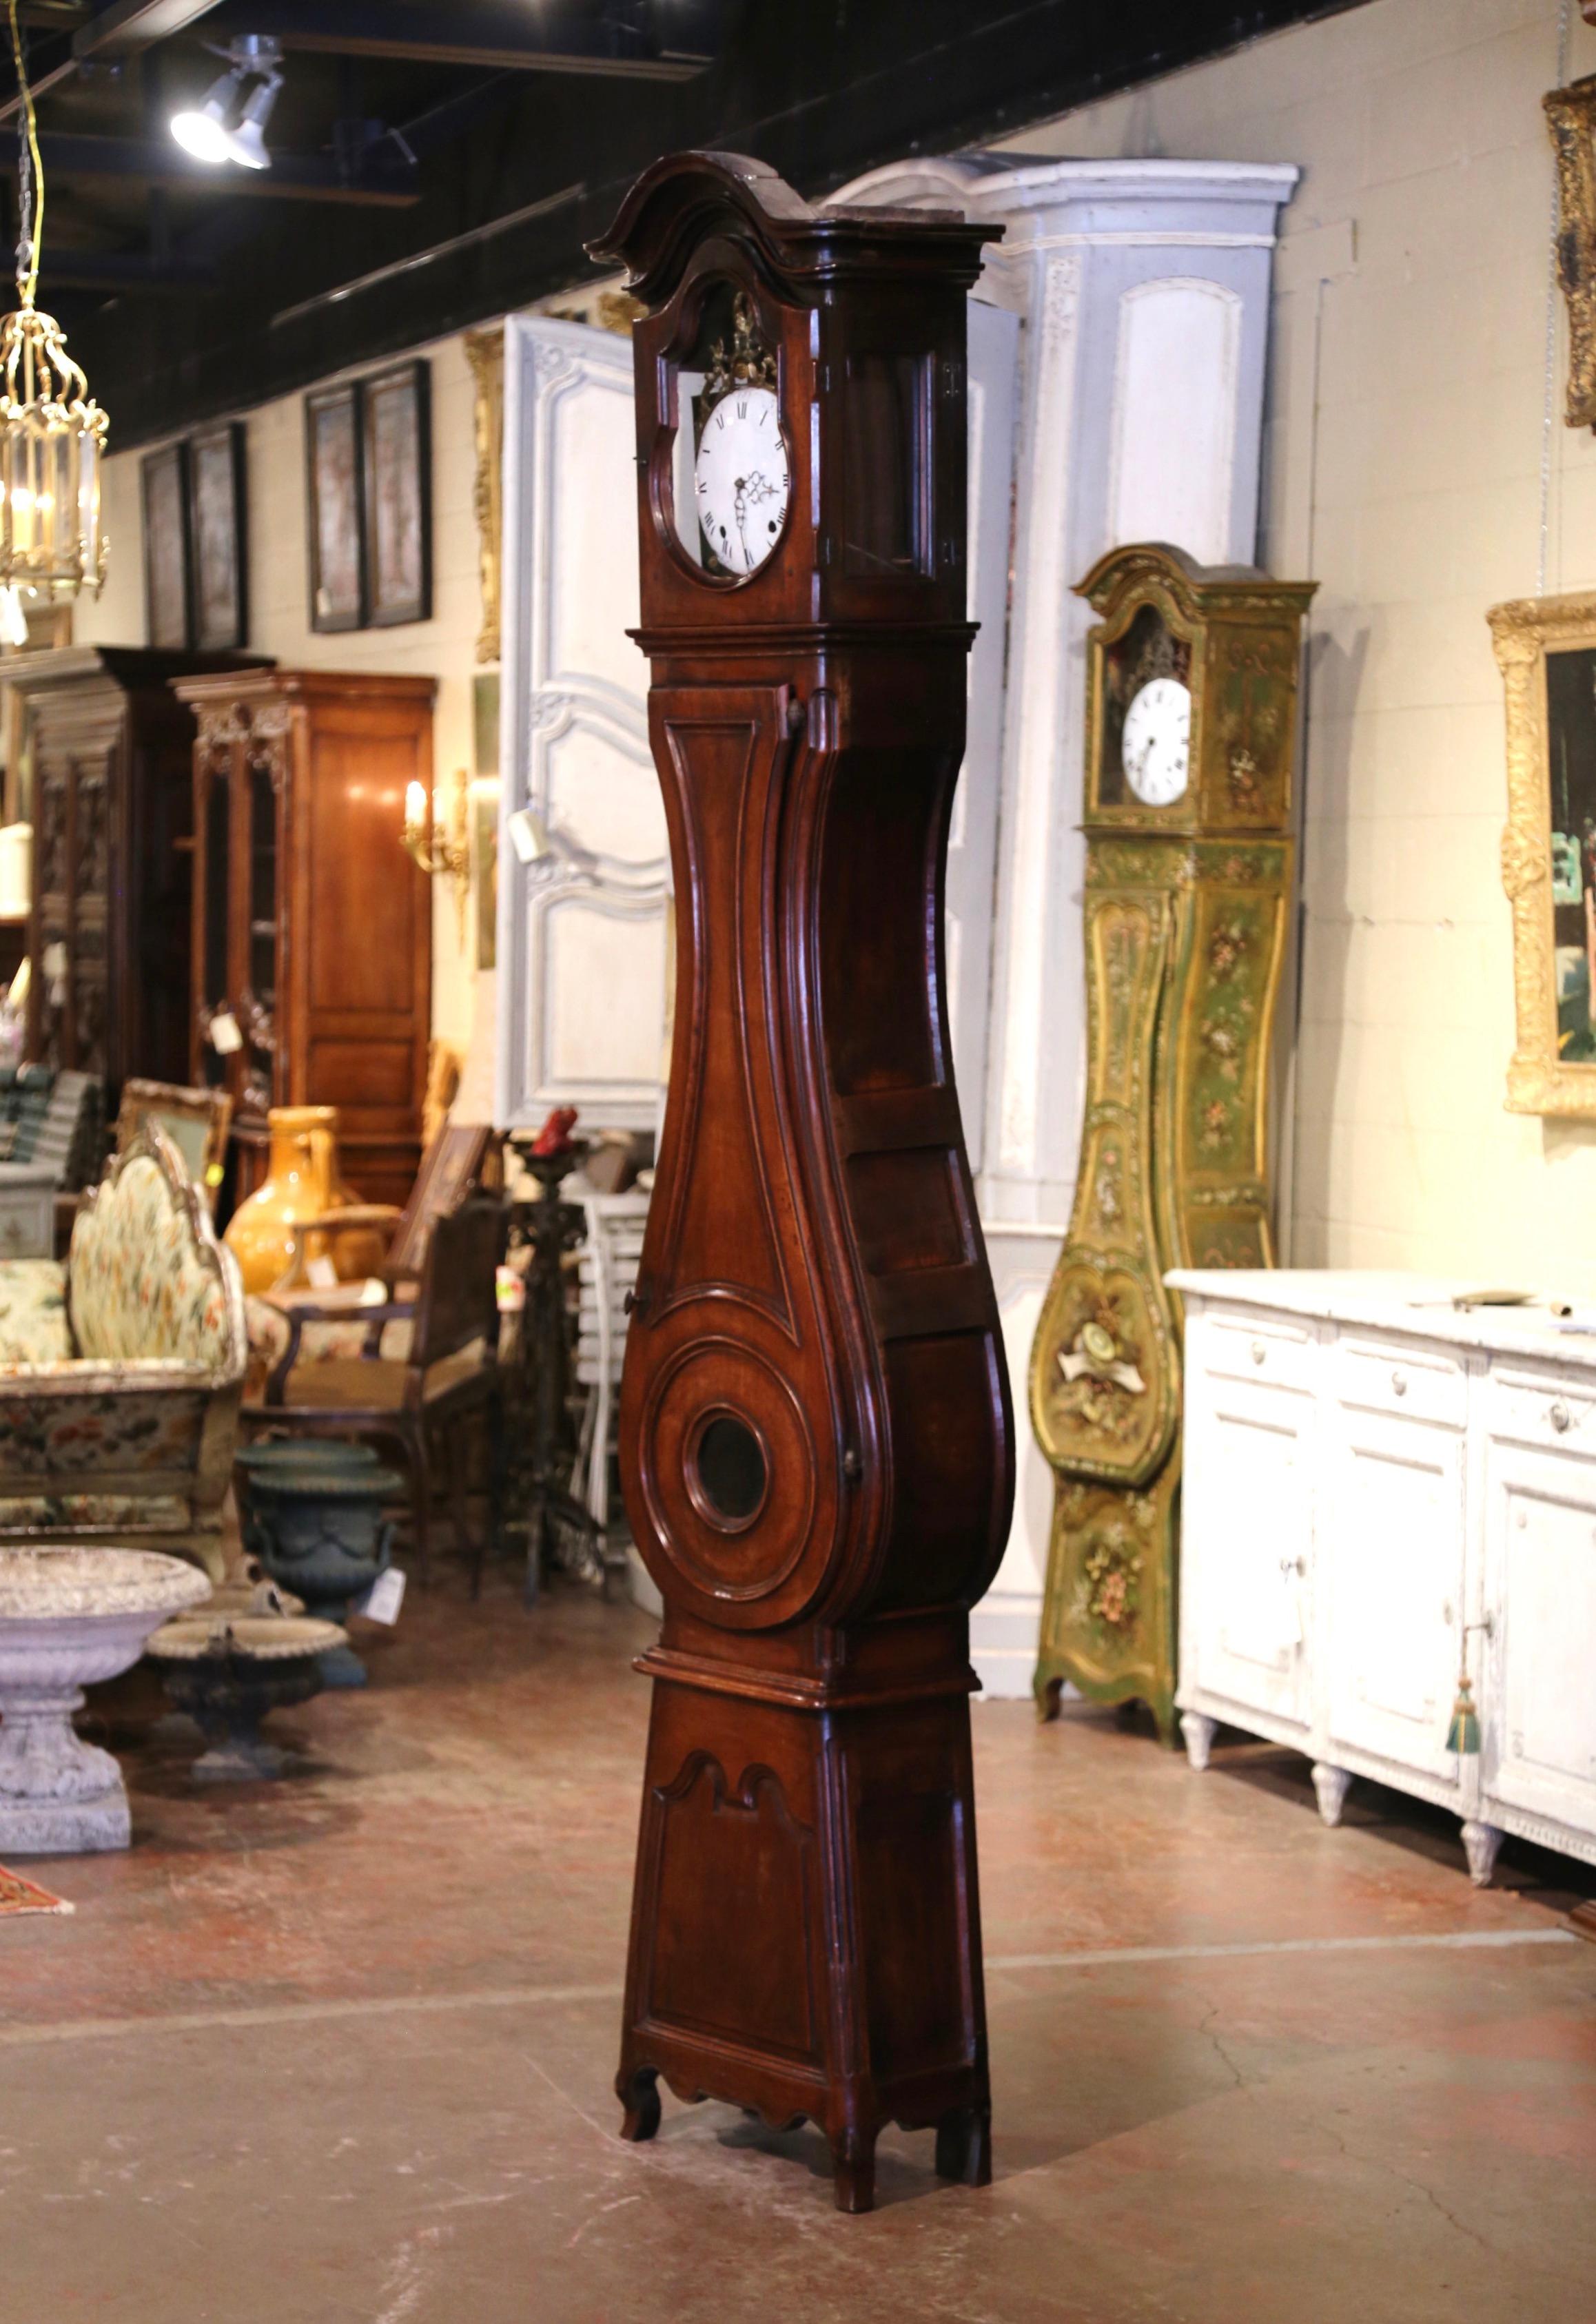 Crafted in Lyon, France, circa 1760 and built in two sections, the antique fruitwood tall case clock stands on curved feet over a scalloped apron, and features beautiful lines including a bonnet top over a violin shape body. The case with carved